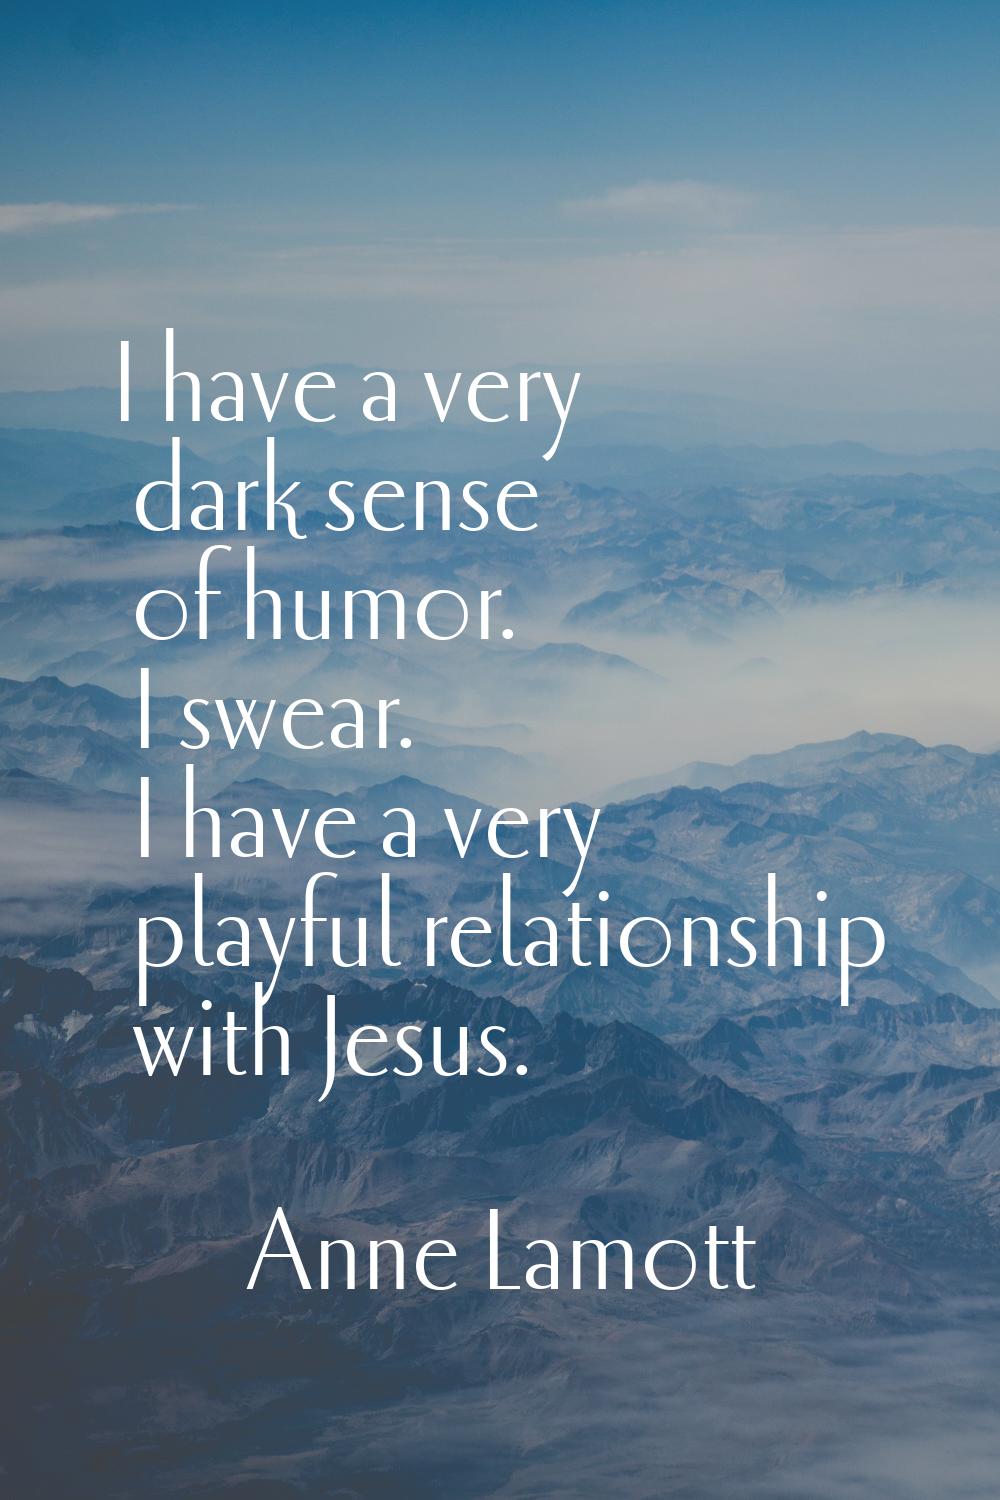 I have a very dark sense of humor. I swear. I have a very playful relationship with Jesus.